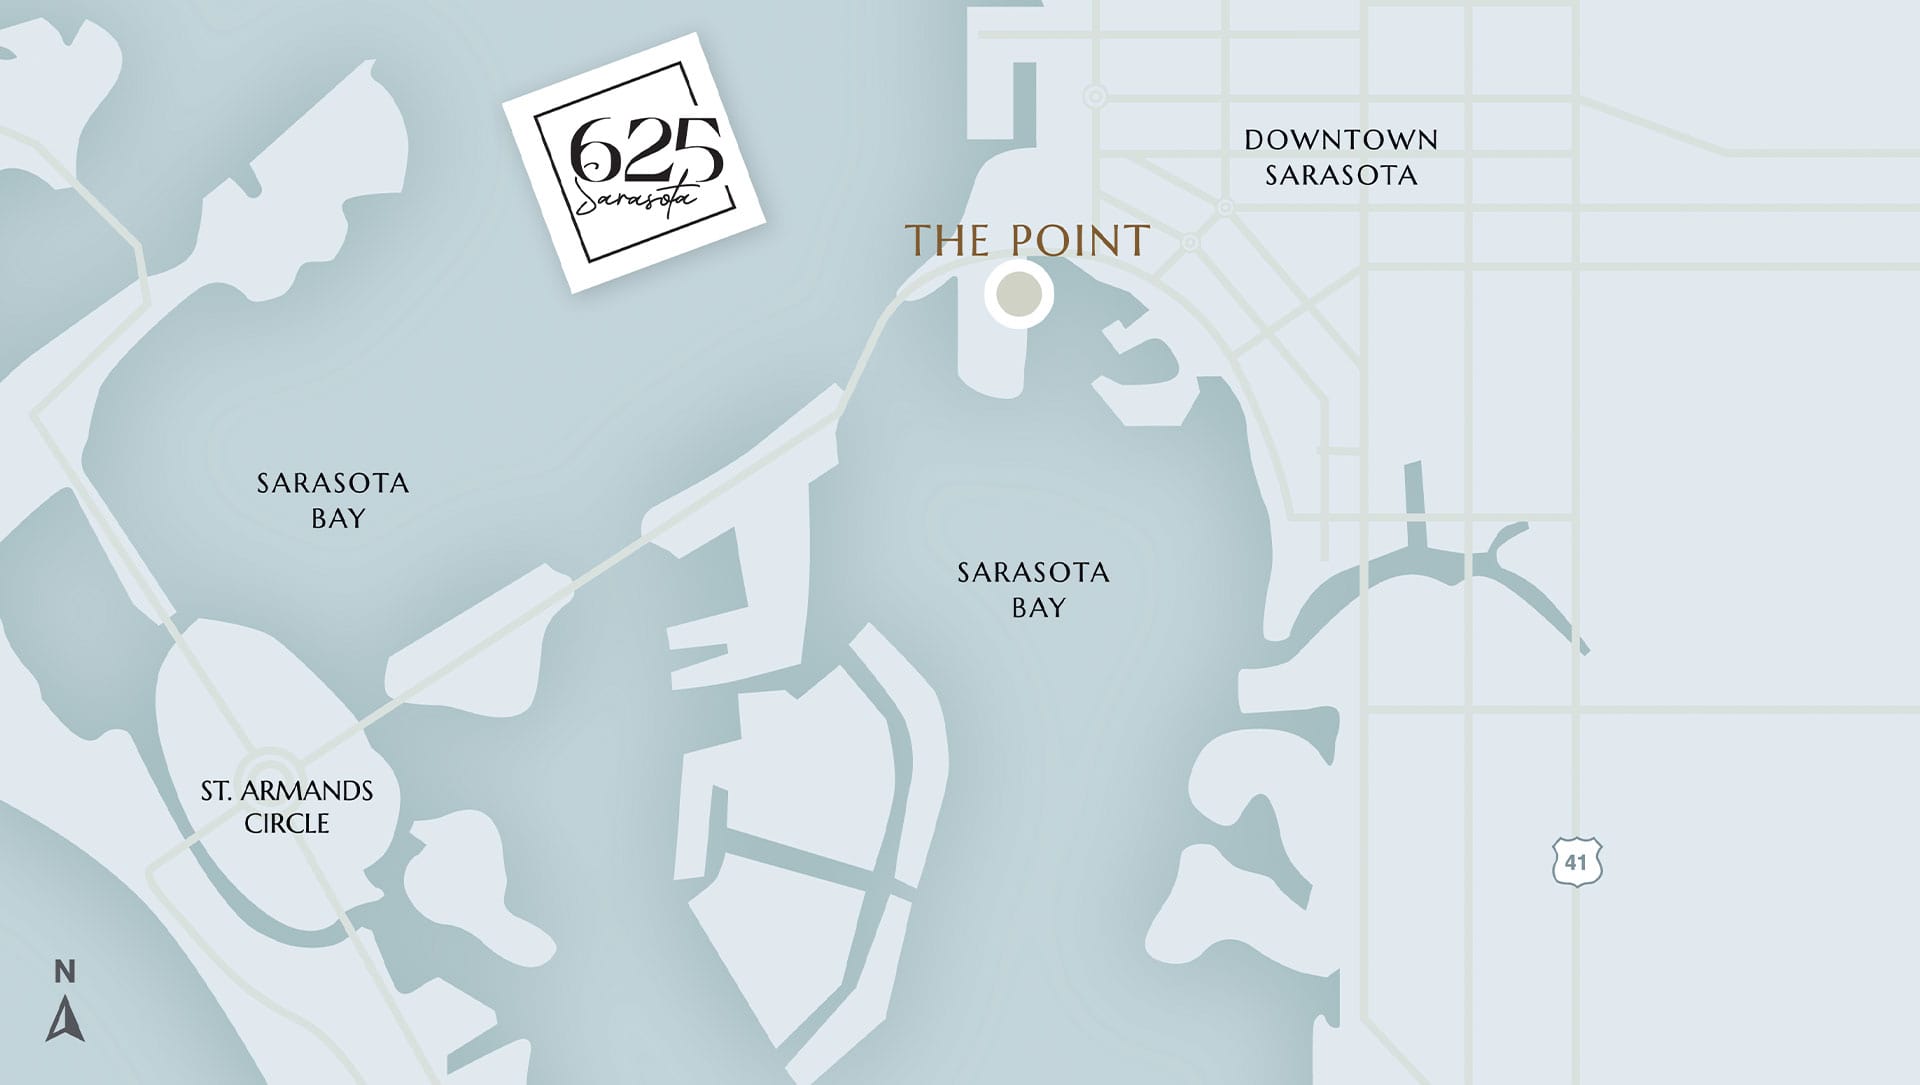 The Point 625 Sarasota Location Map